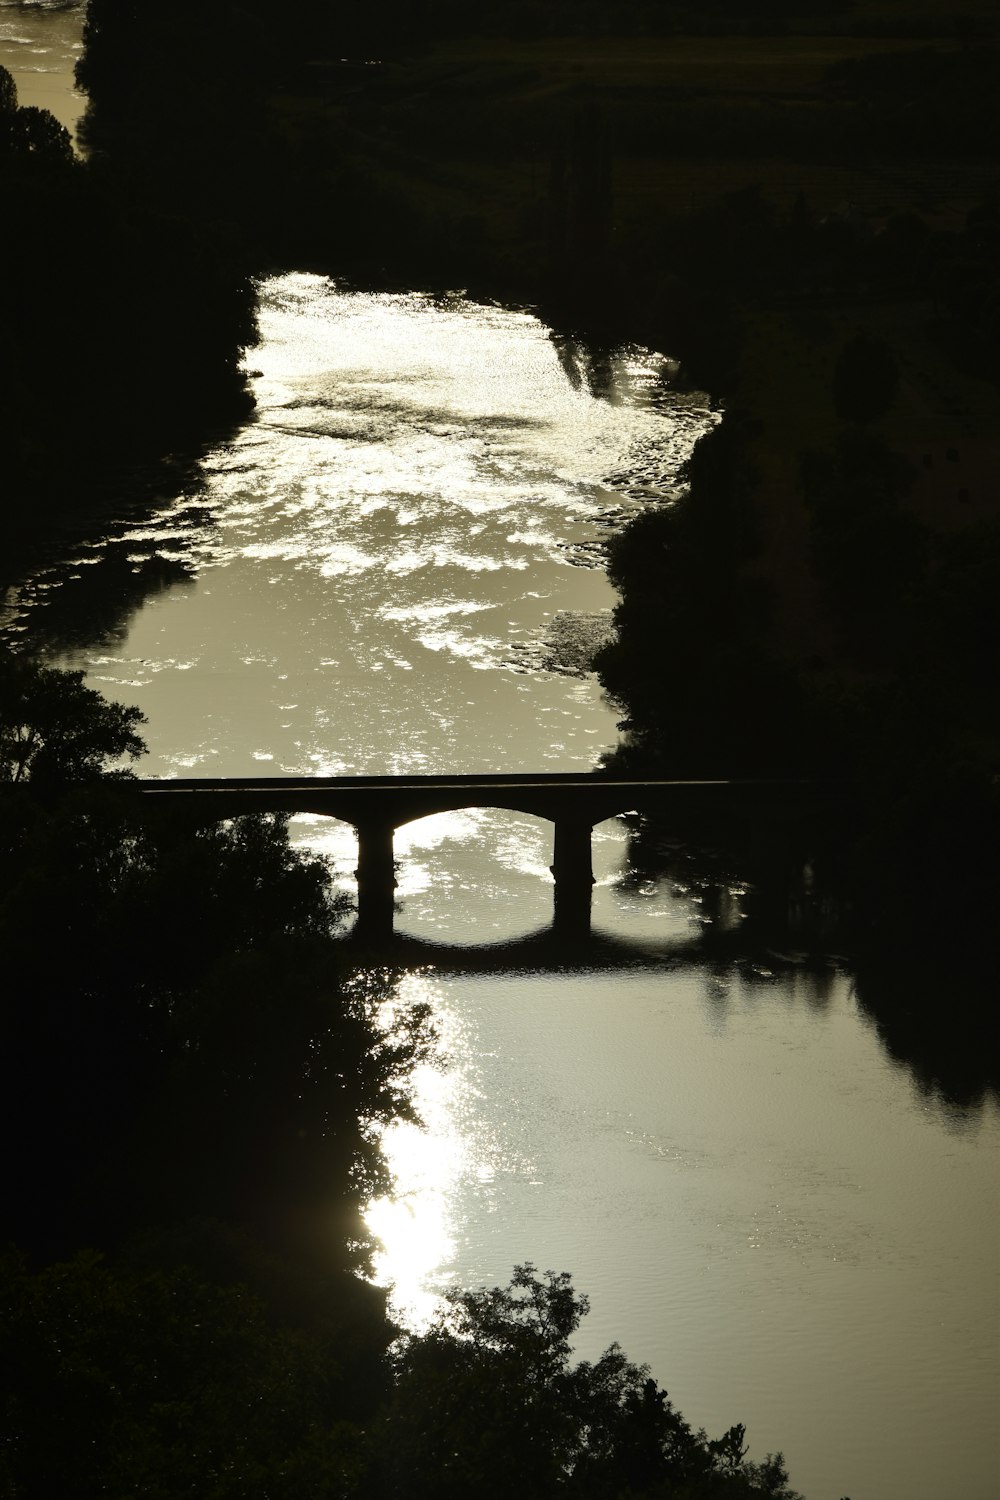 a bridge over a body of water with trees in the foreground